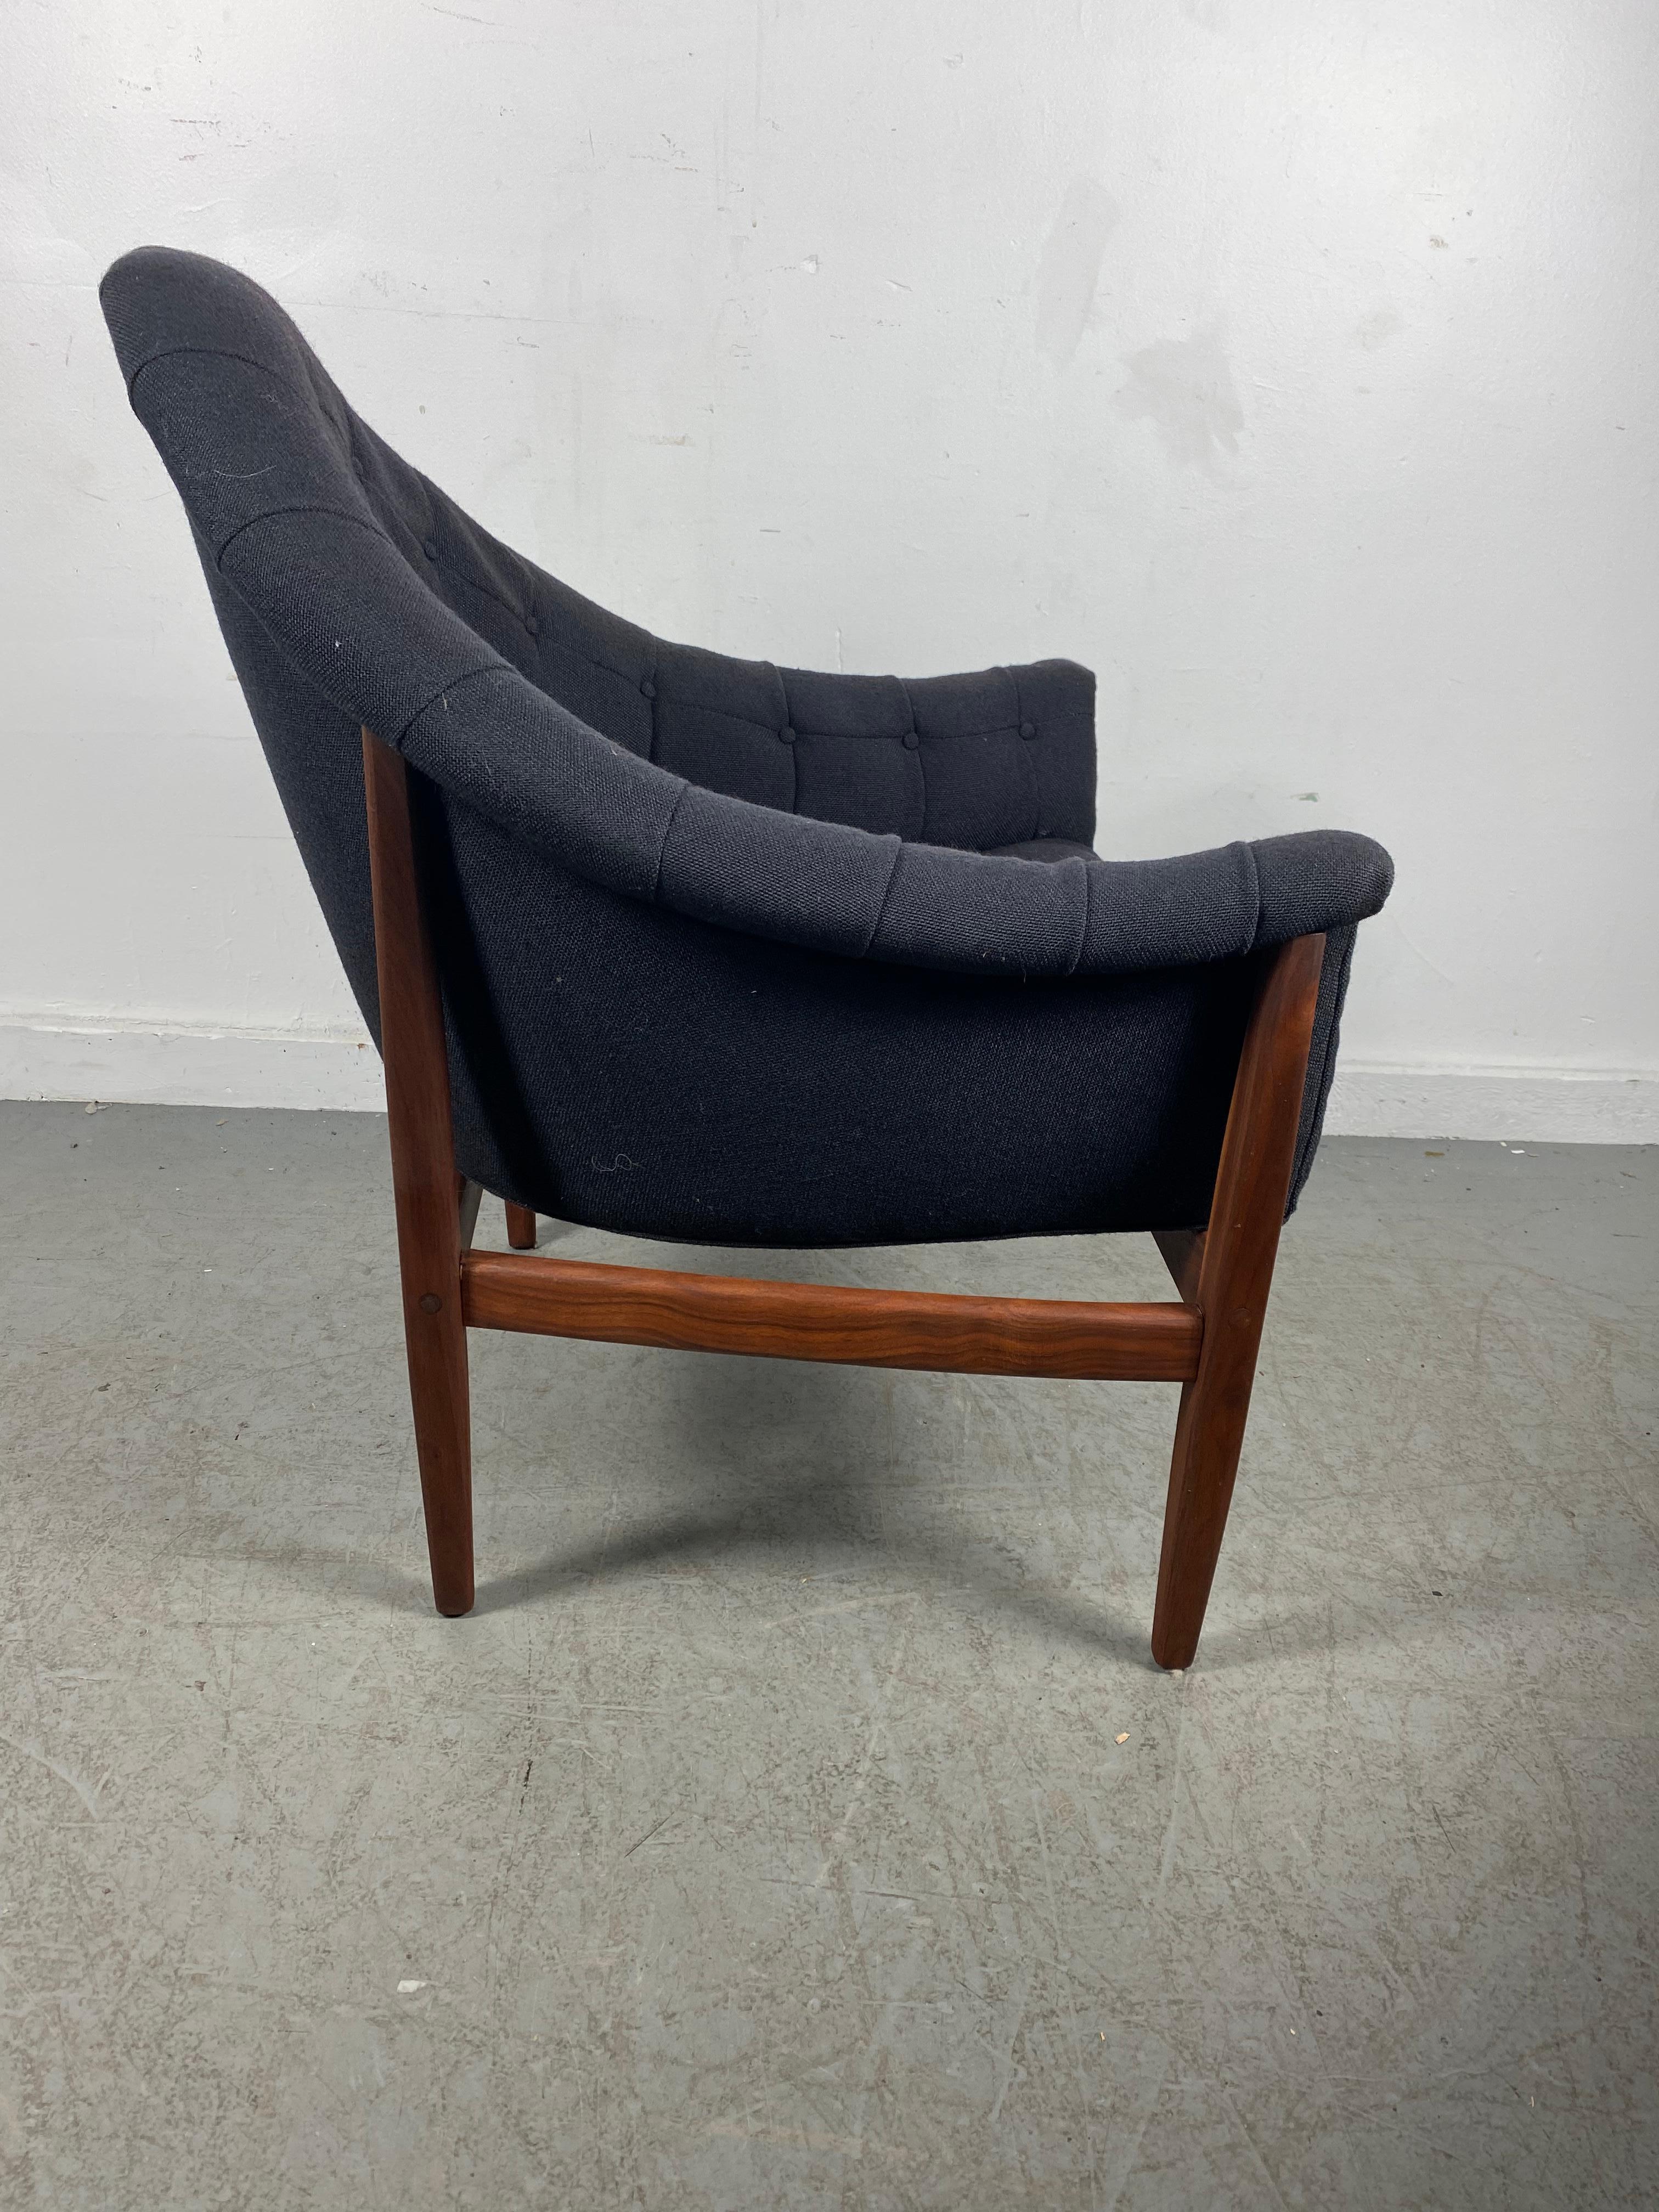 Thayer Coggin by Milo Baughman Rare Exposed Frame Lounge Chair Circa 1965 In Good Condition For Sale In Buffalo, NY